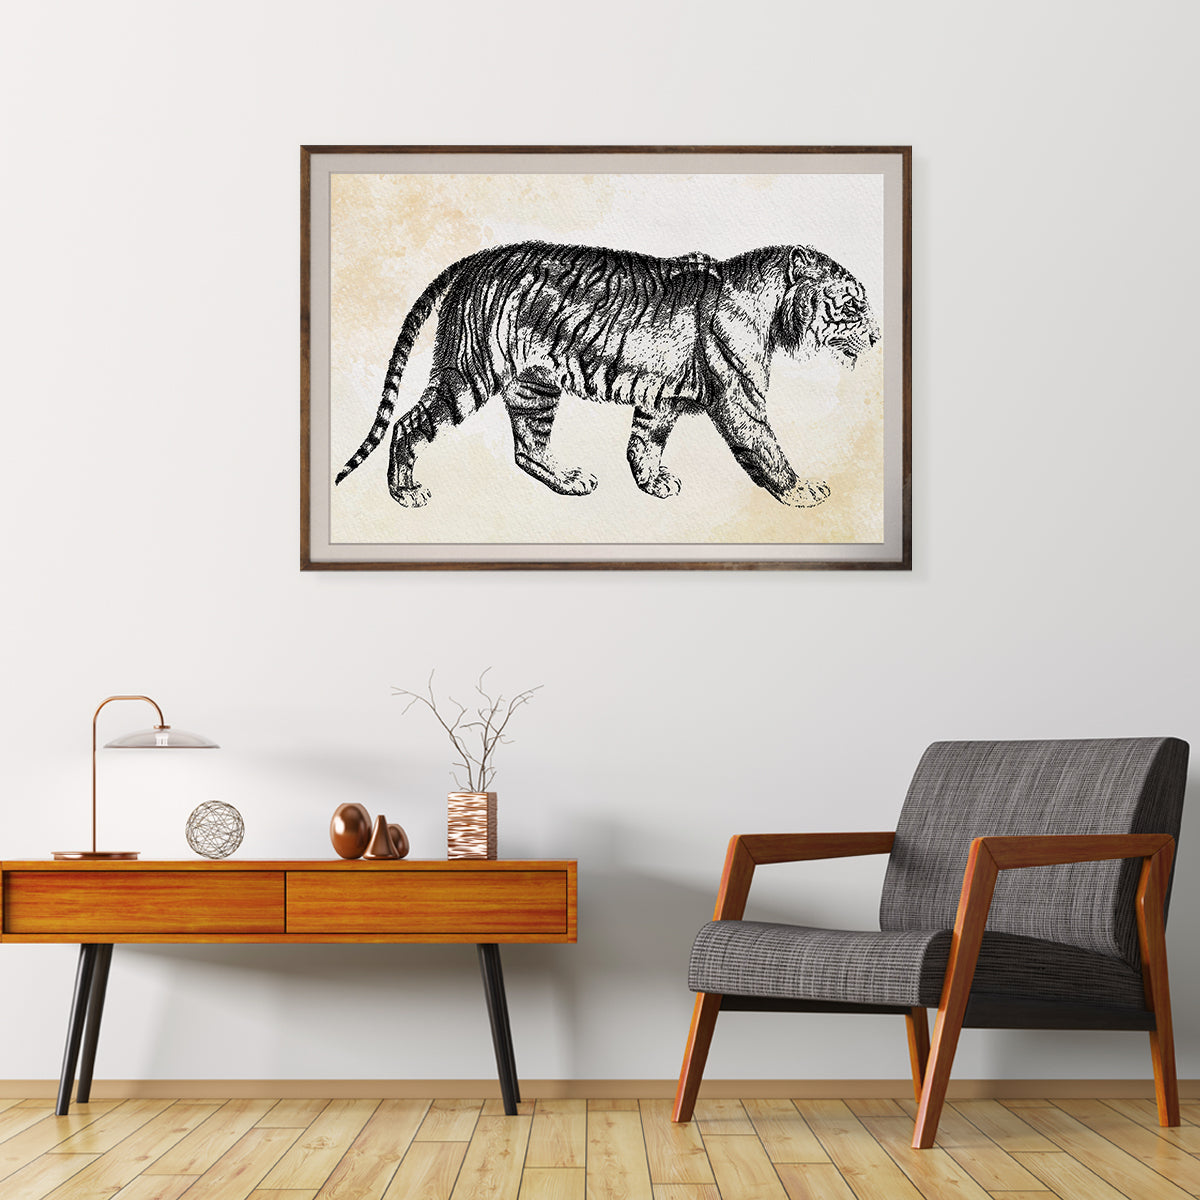 Vintage Tiger Art Posters For Home Decor-Horizontal Posters NOT FRAMED-CetArt-10″x8″ inches-CetArt